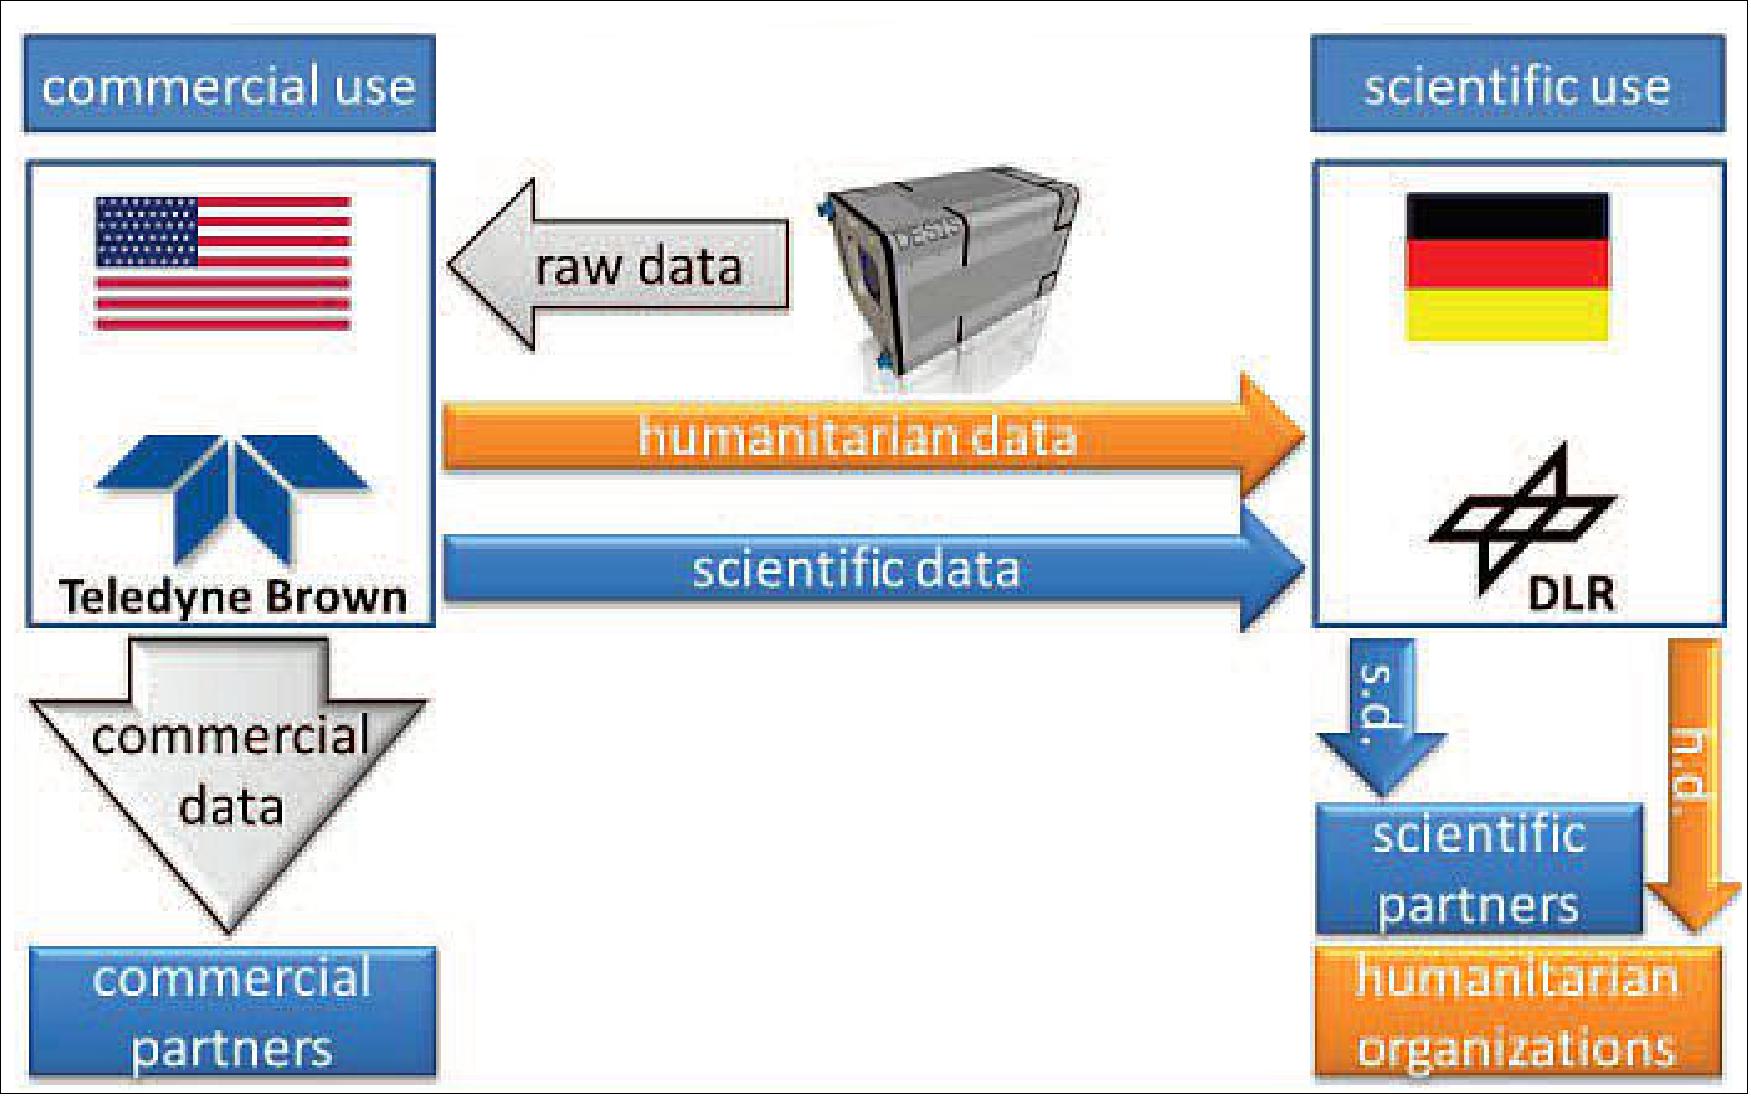 Figure 30: DESIS data access policy (image credit: DLR)